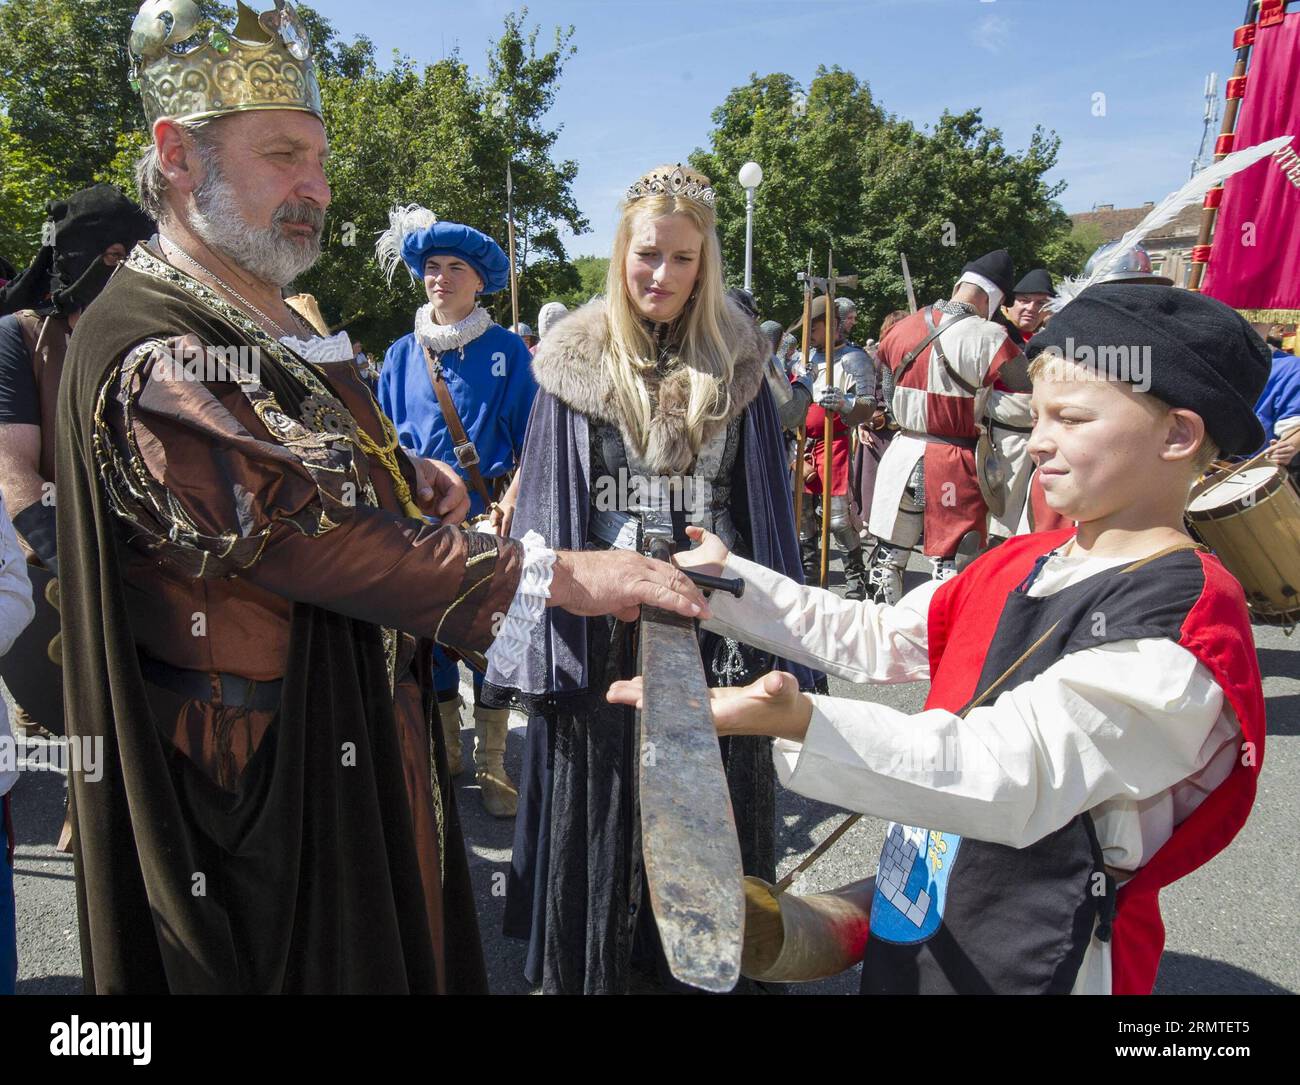 (140831) -- KOPRIVNICA,  --  Performers dressed up in historical costumes parade during Renaissance Festival in Koprivnica, northern Croatia, Aug. 30, 2014. More than a thousand people from nine countries took part in this traditional festival. n) CROATIA-KOPRIVNICA-RENAISSANCE FESTIVAL MisoxLisani PUBLICATIONxNOTxINxCHN   Performers Dressed up in Historical Costumes Parade during Renaissance Festival in  Northern Croatia Aug 30 2014 More than a Thousand Celebrities from Nine Countries took Part in This Traditional Festival n Croatia  Renaissance Festival  PUBLICATIONxNOTxINxCHN Stock Photo